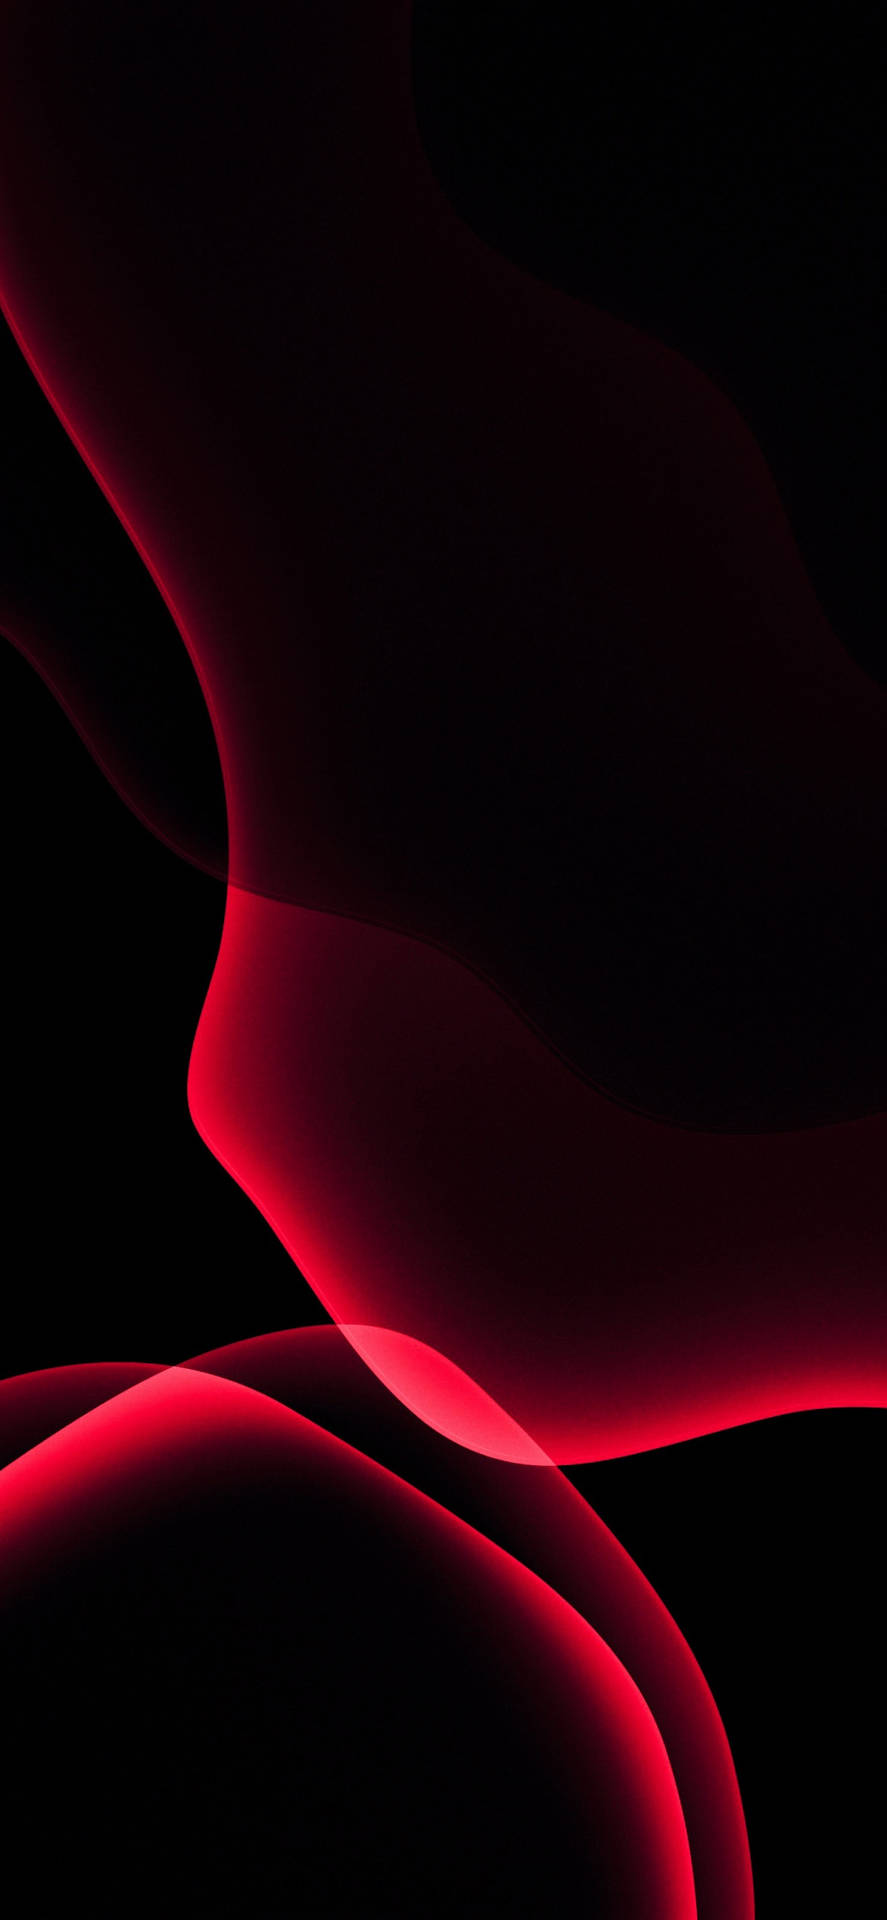 Bring a dazzling touch of red and black to your iPhone Wallpaper